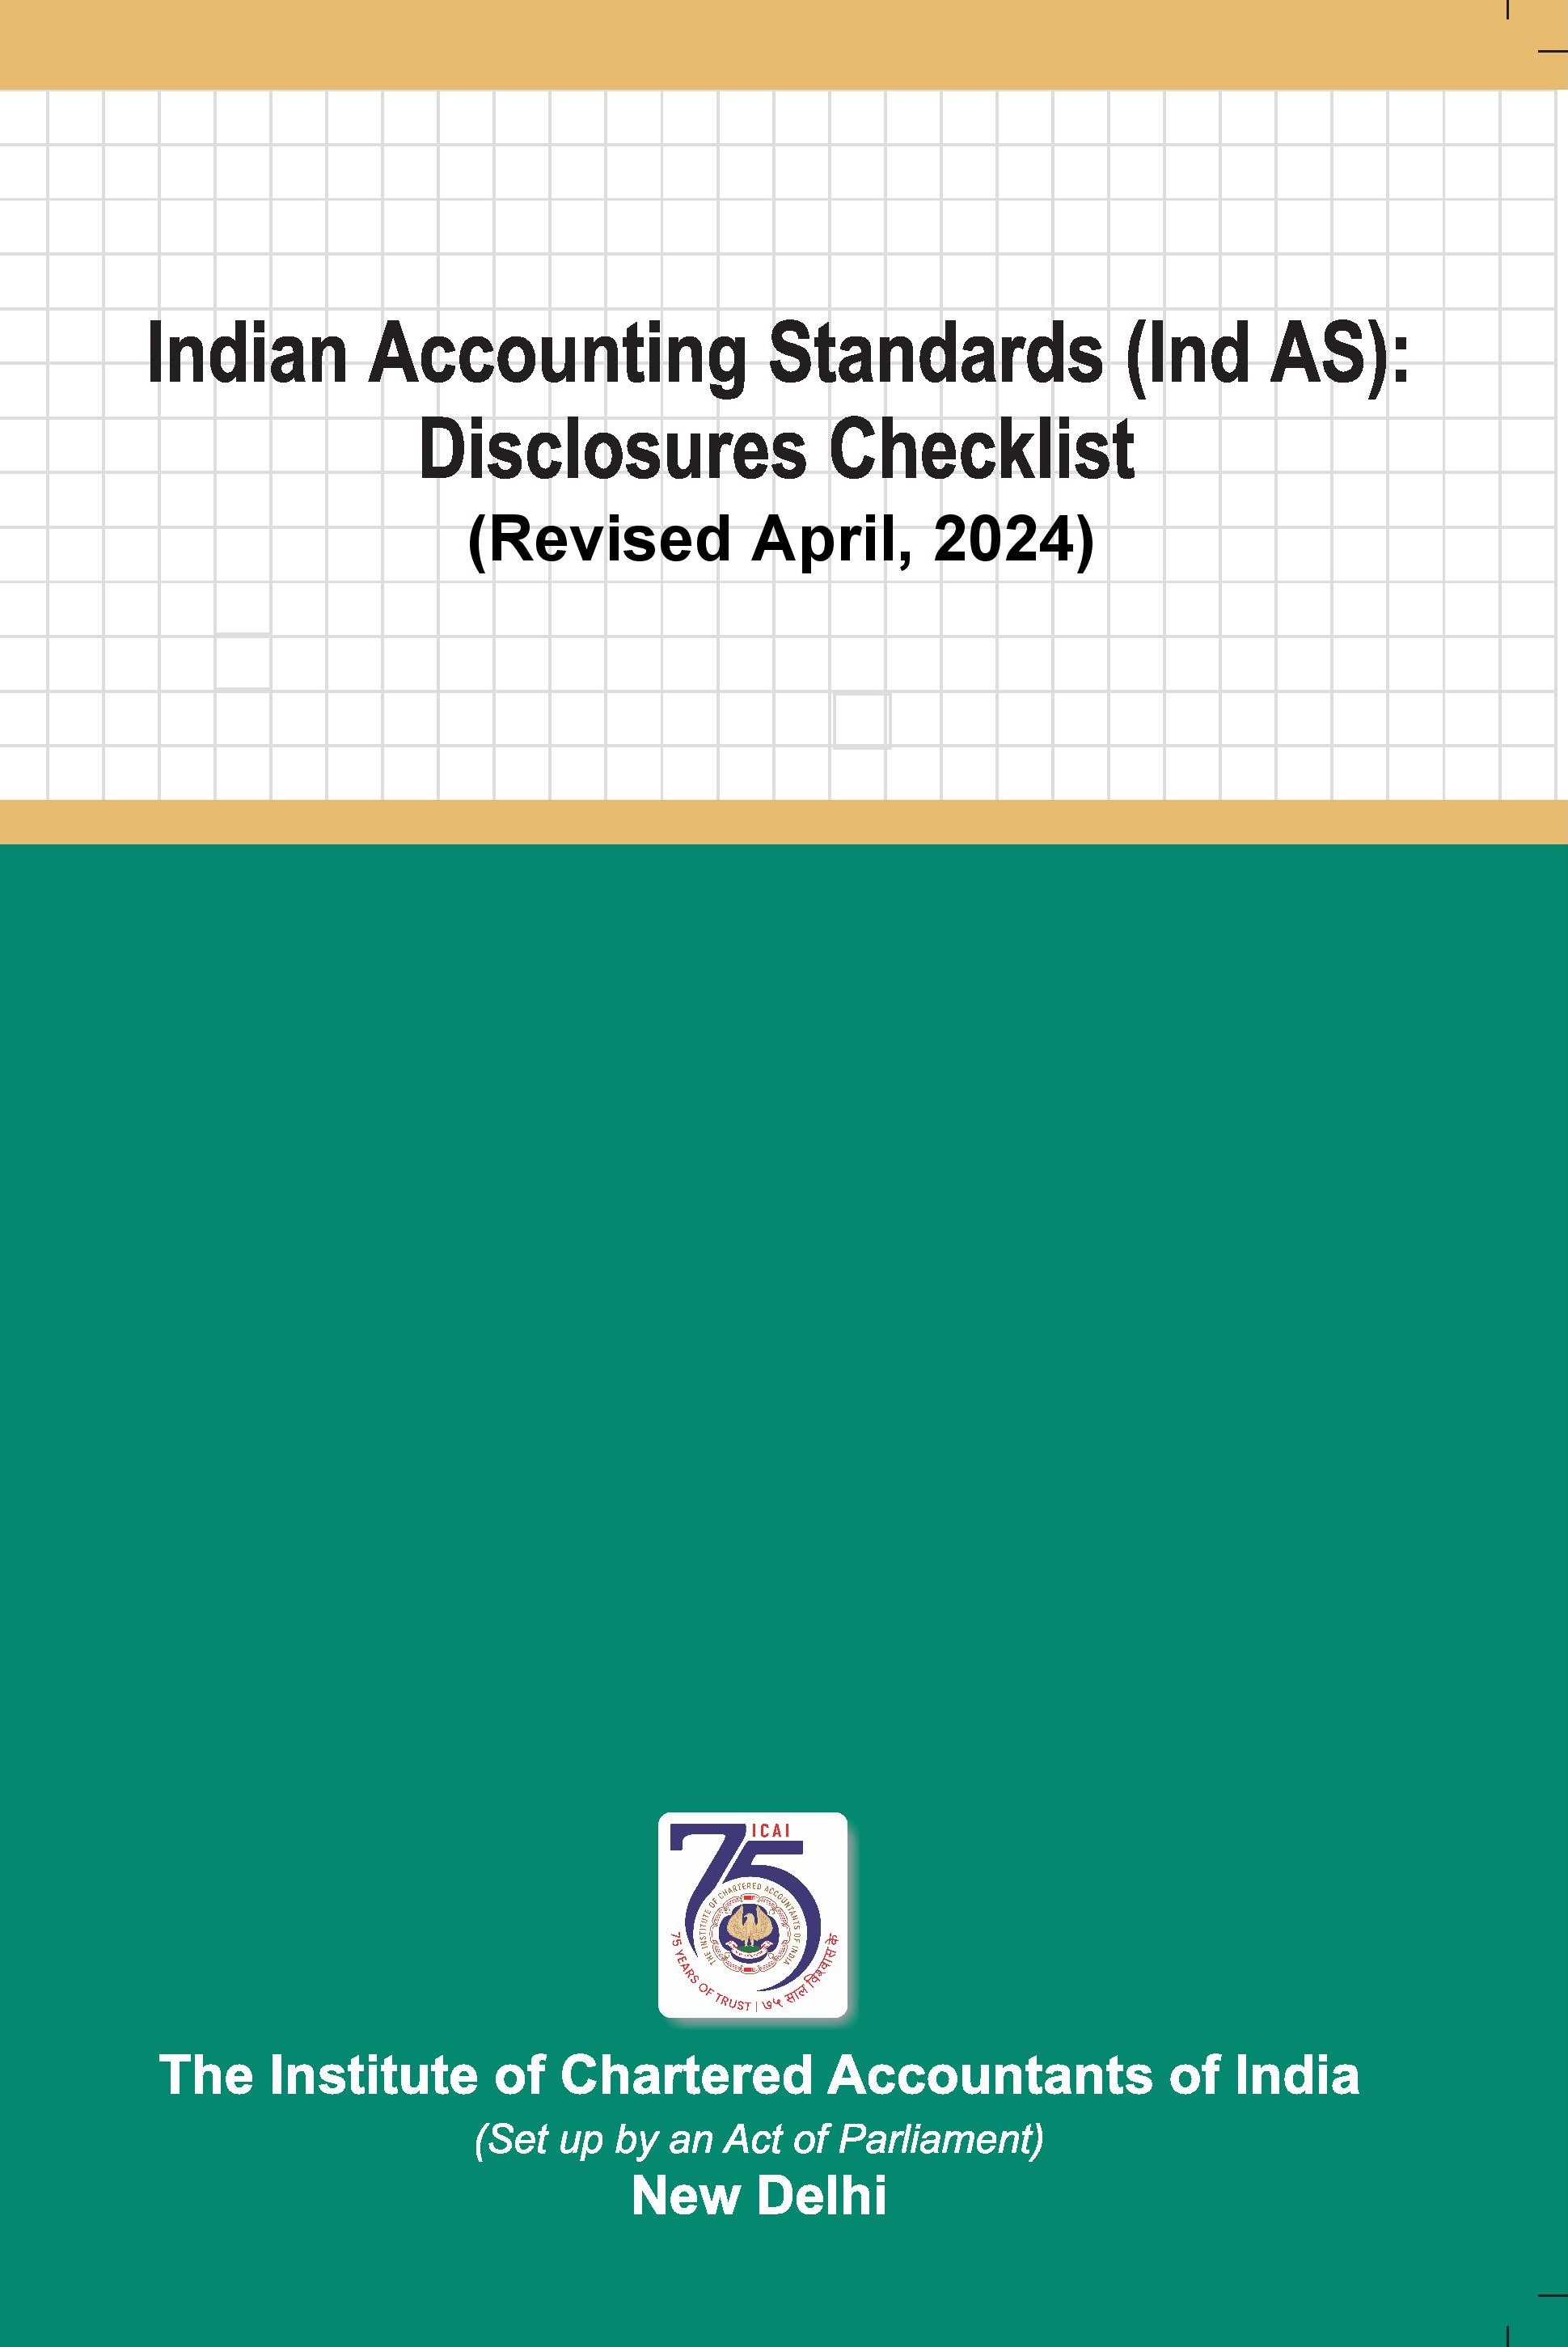 Indian Accounting Standards (Ind AS): Disclosures Checklist - (Revised April, 2024)